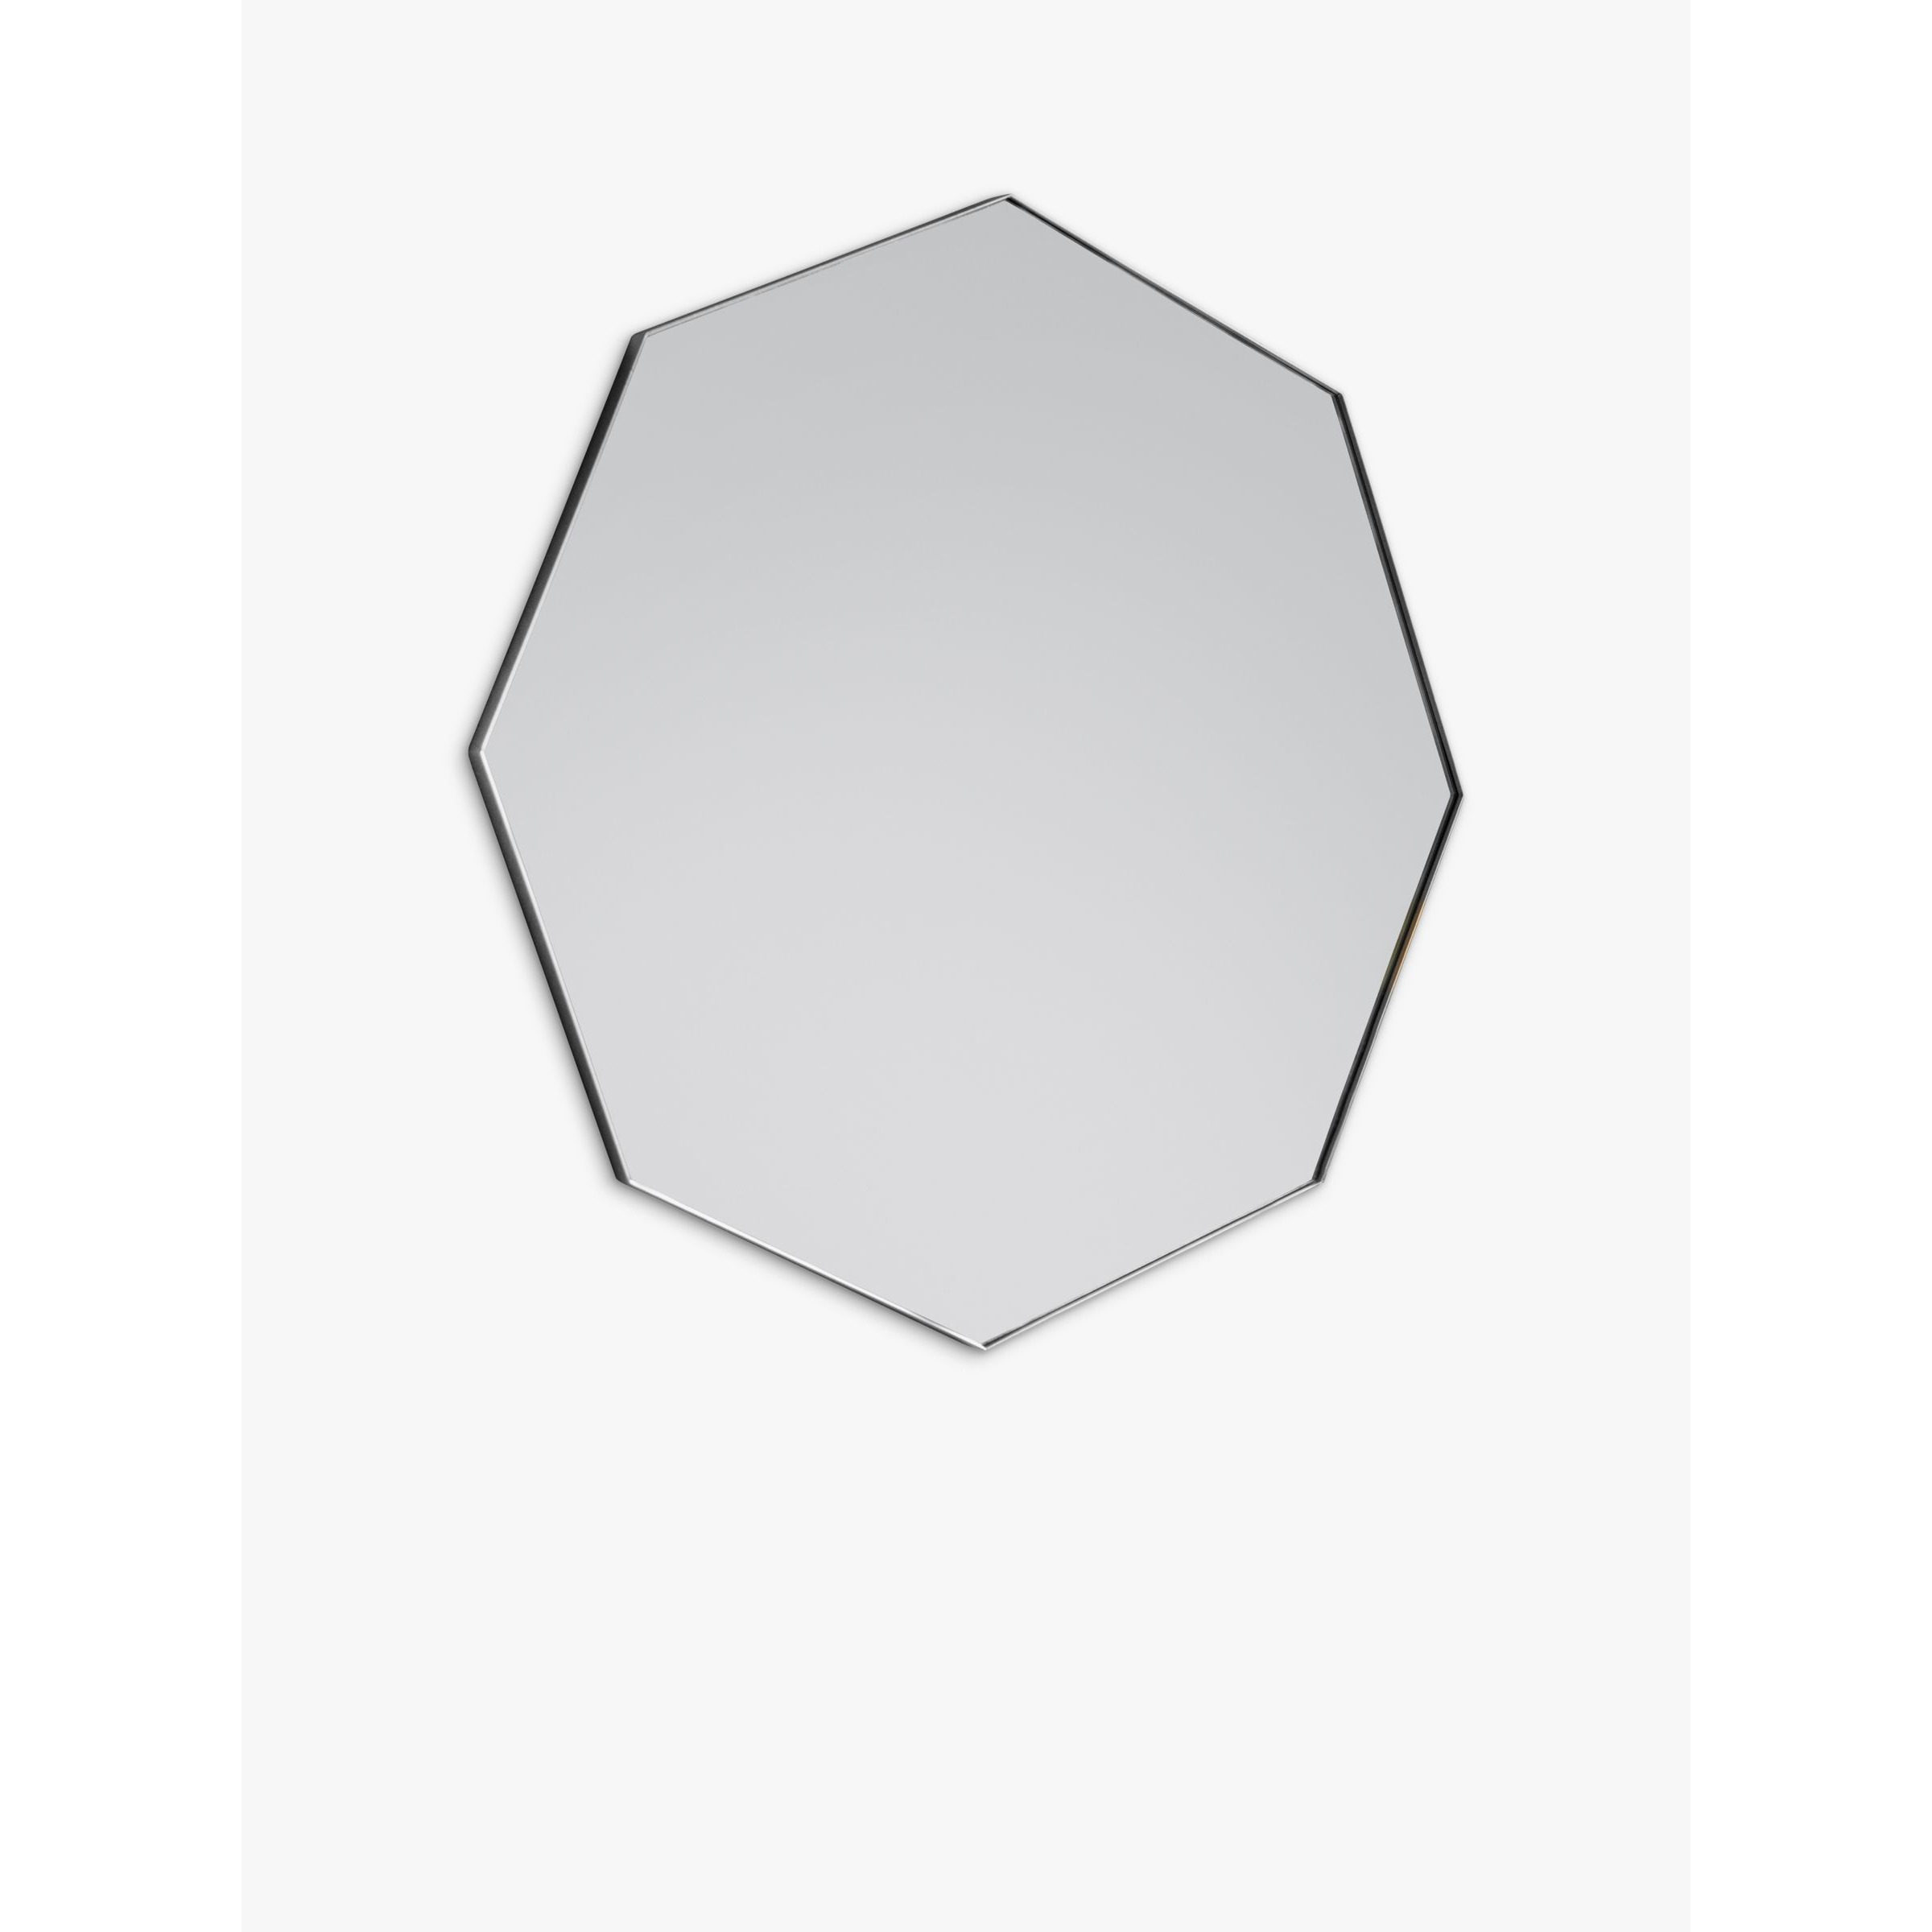 Gallery Direct Bowie Octagonal Metal Frame Mirror, 80 x 80cm - image 1